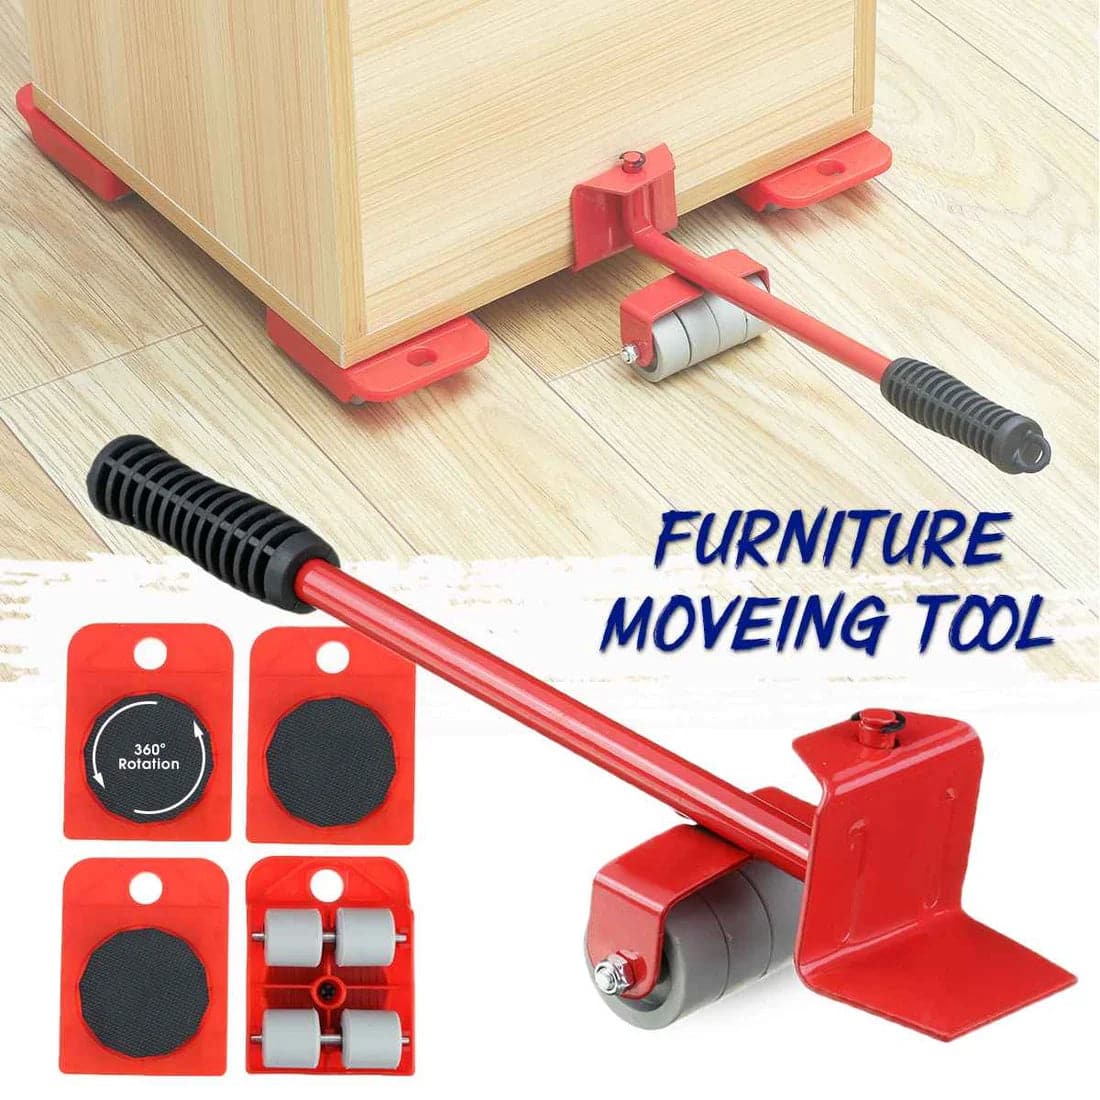 Furniture lift mover tool